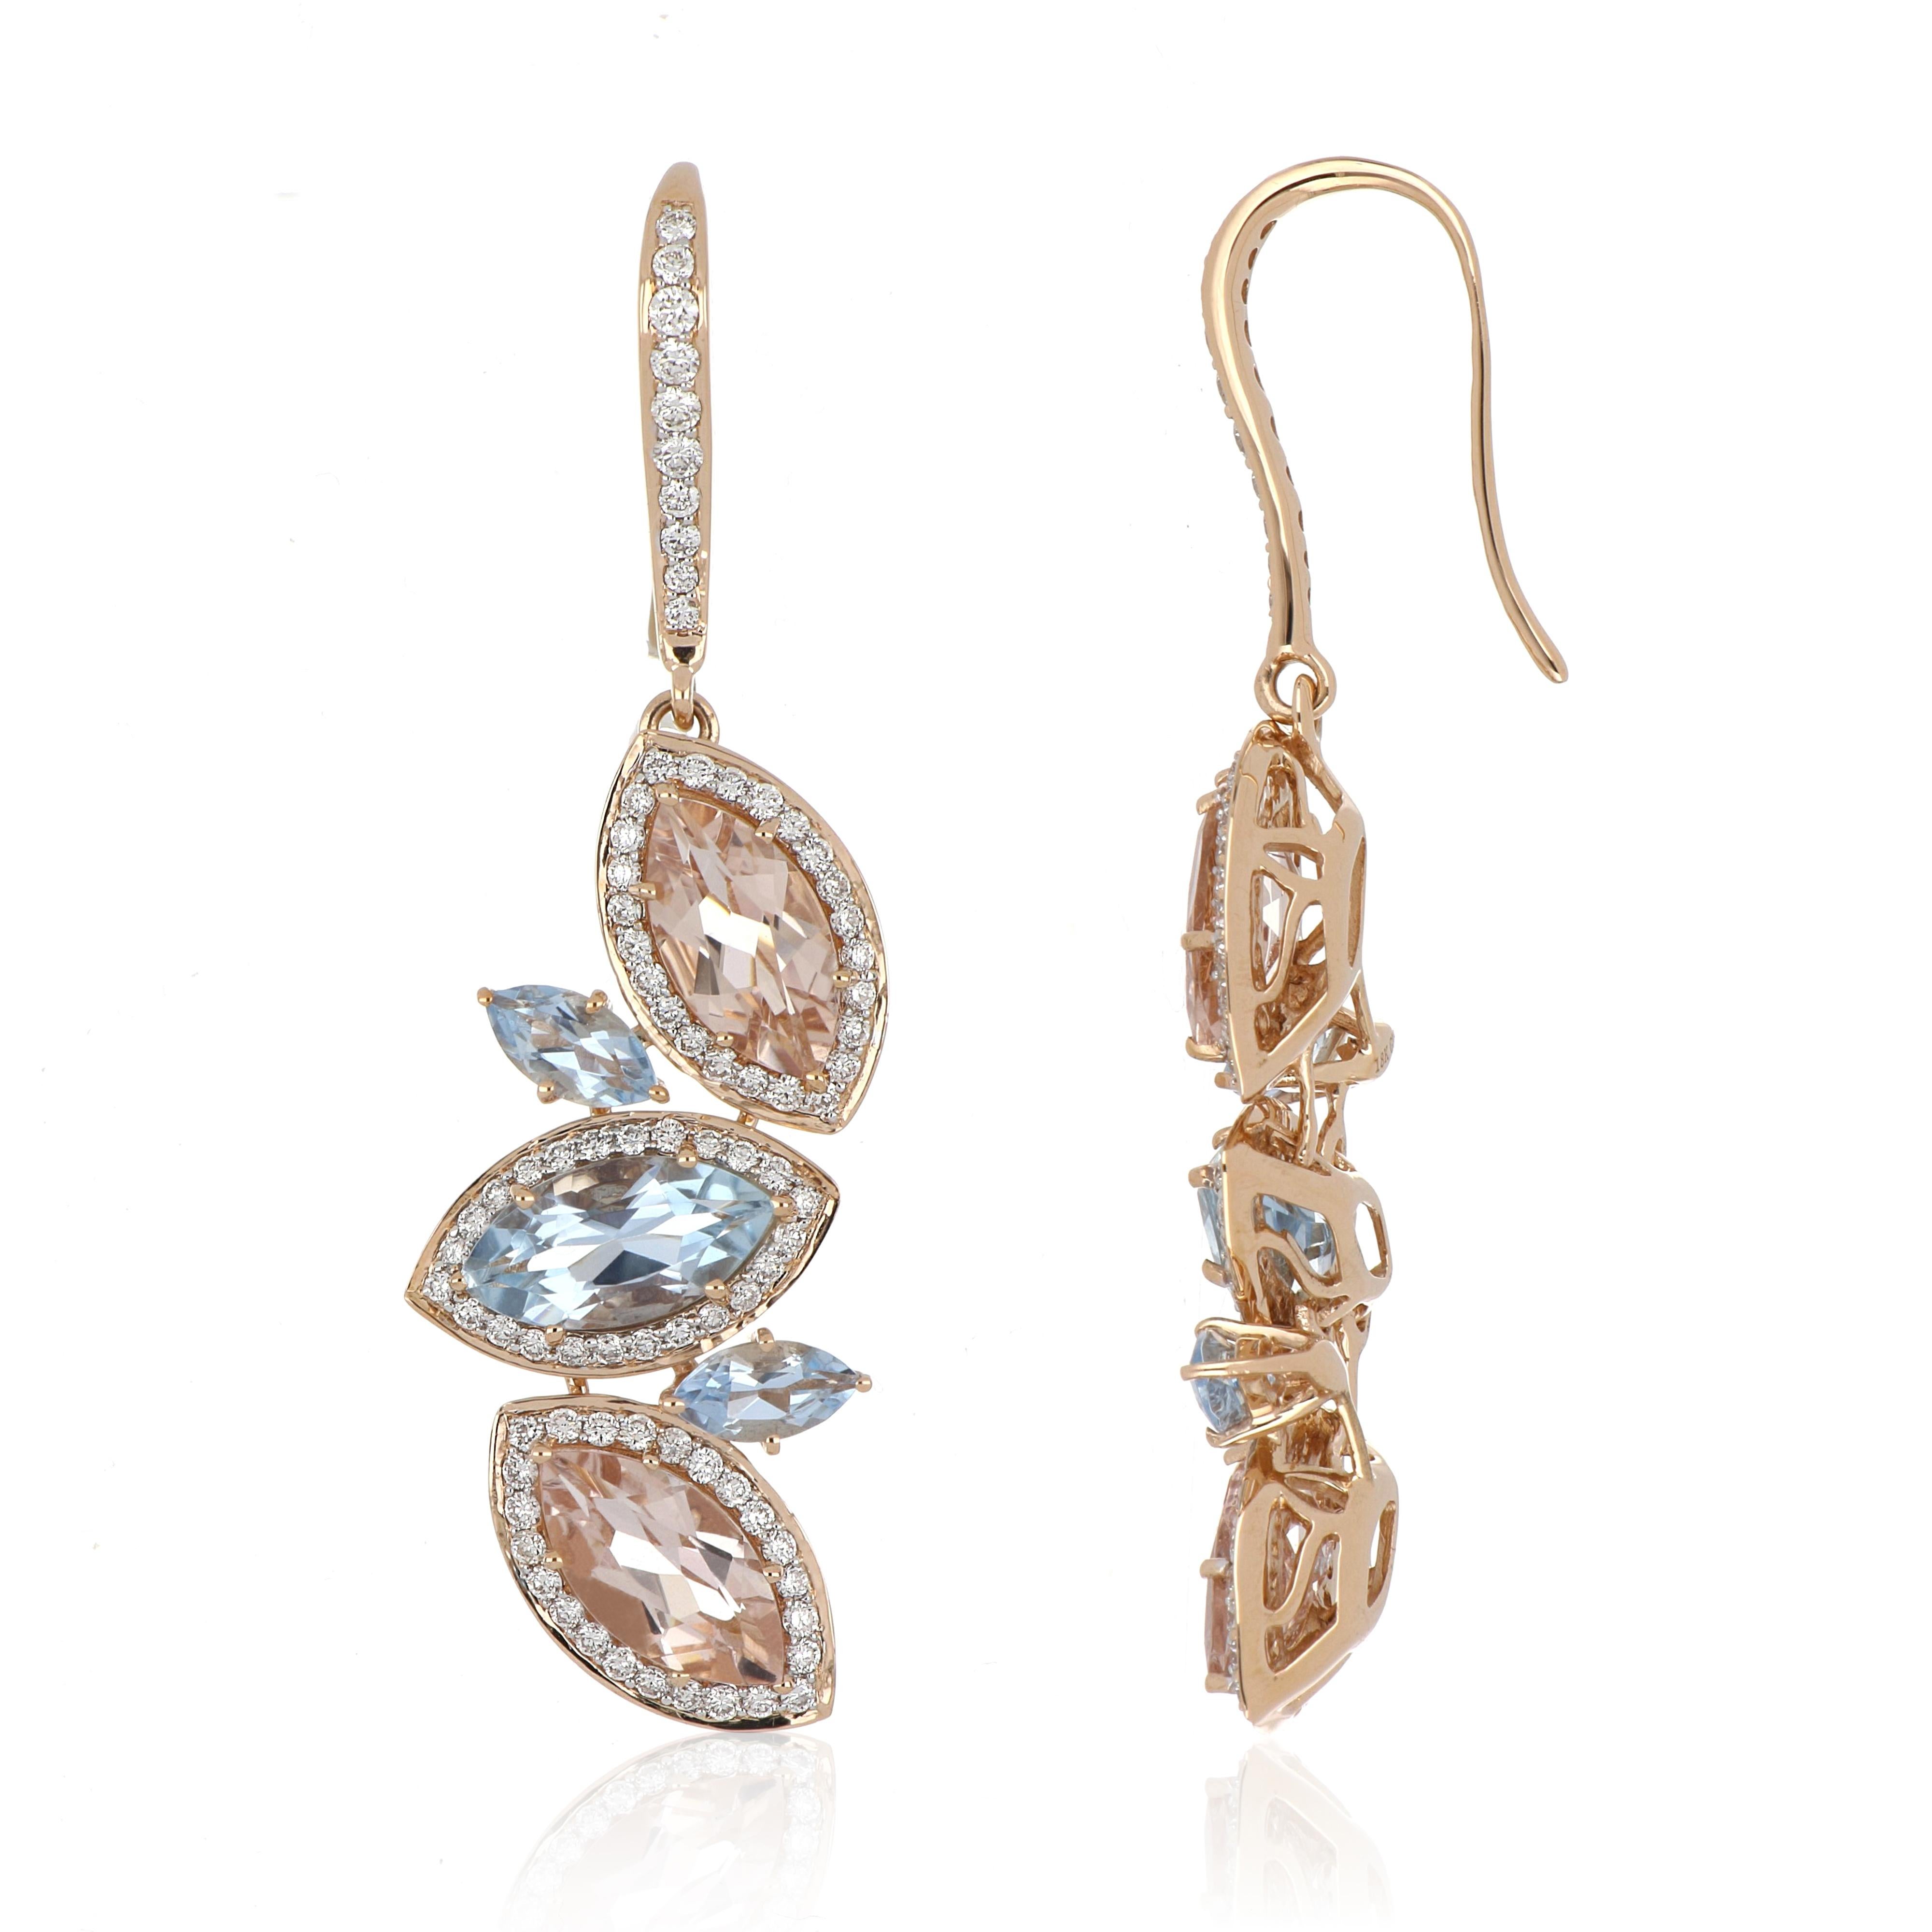 Elegant and Exquisitely detailed Dangling Gold Earrings, set with 2.66 Ct (total ) Aquamarine, 3.58 Cts (total)  Morganite, accented with Marquise Diamonds, weighing approx. 1.08 Cts. total carat weight.  Beautifully Hand crafted in 18 Karat Rose